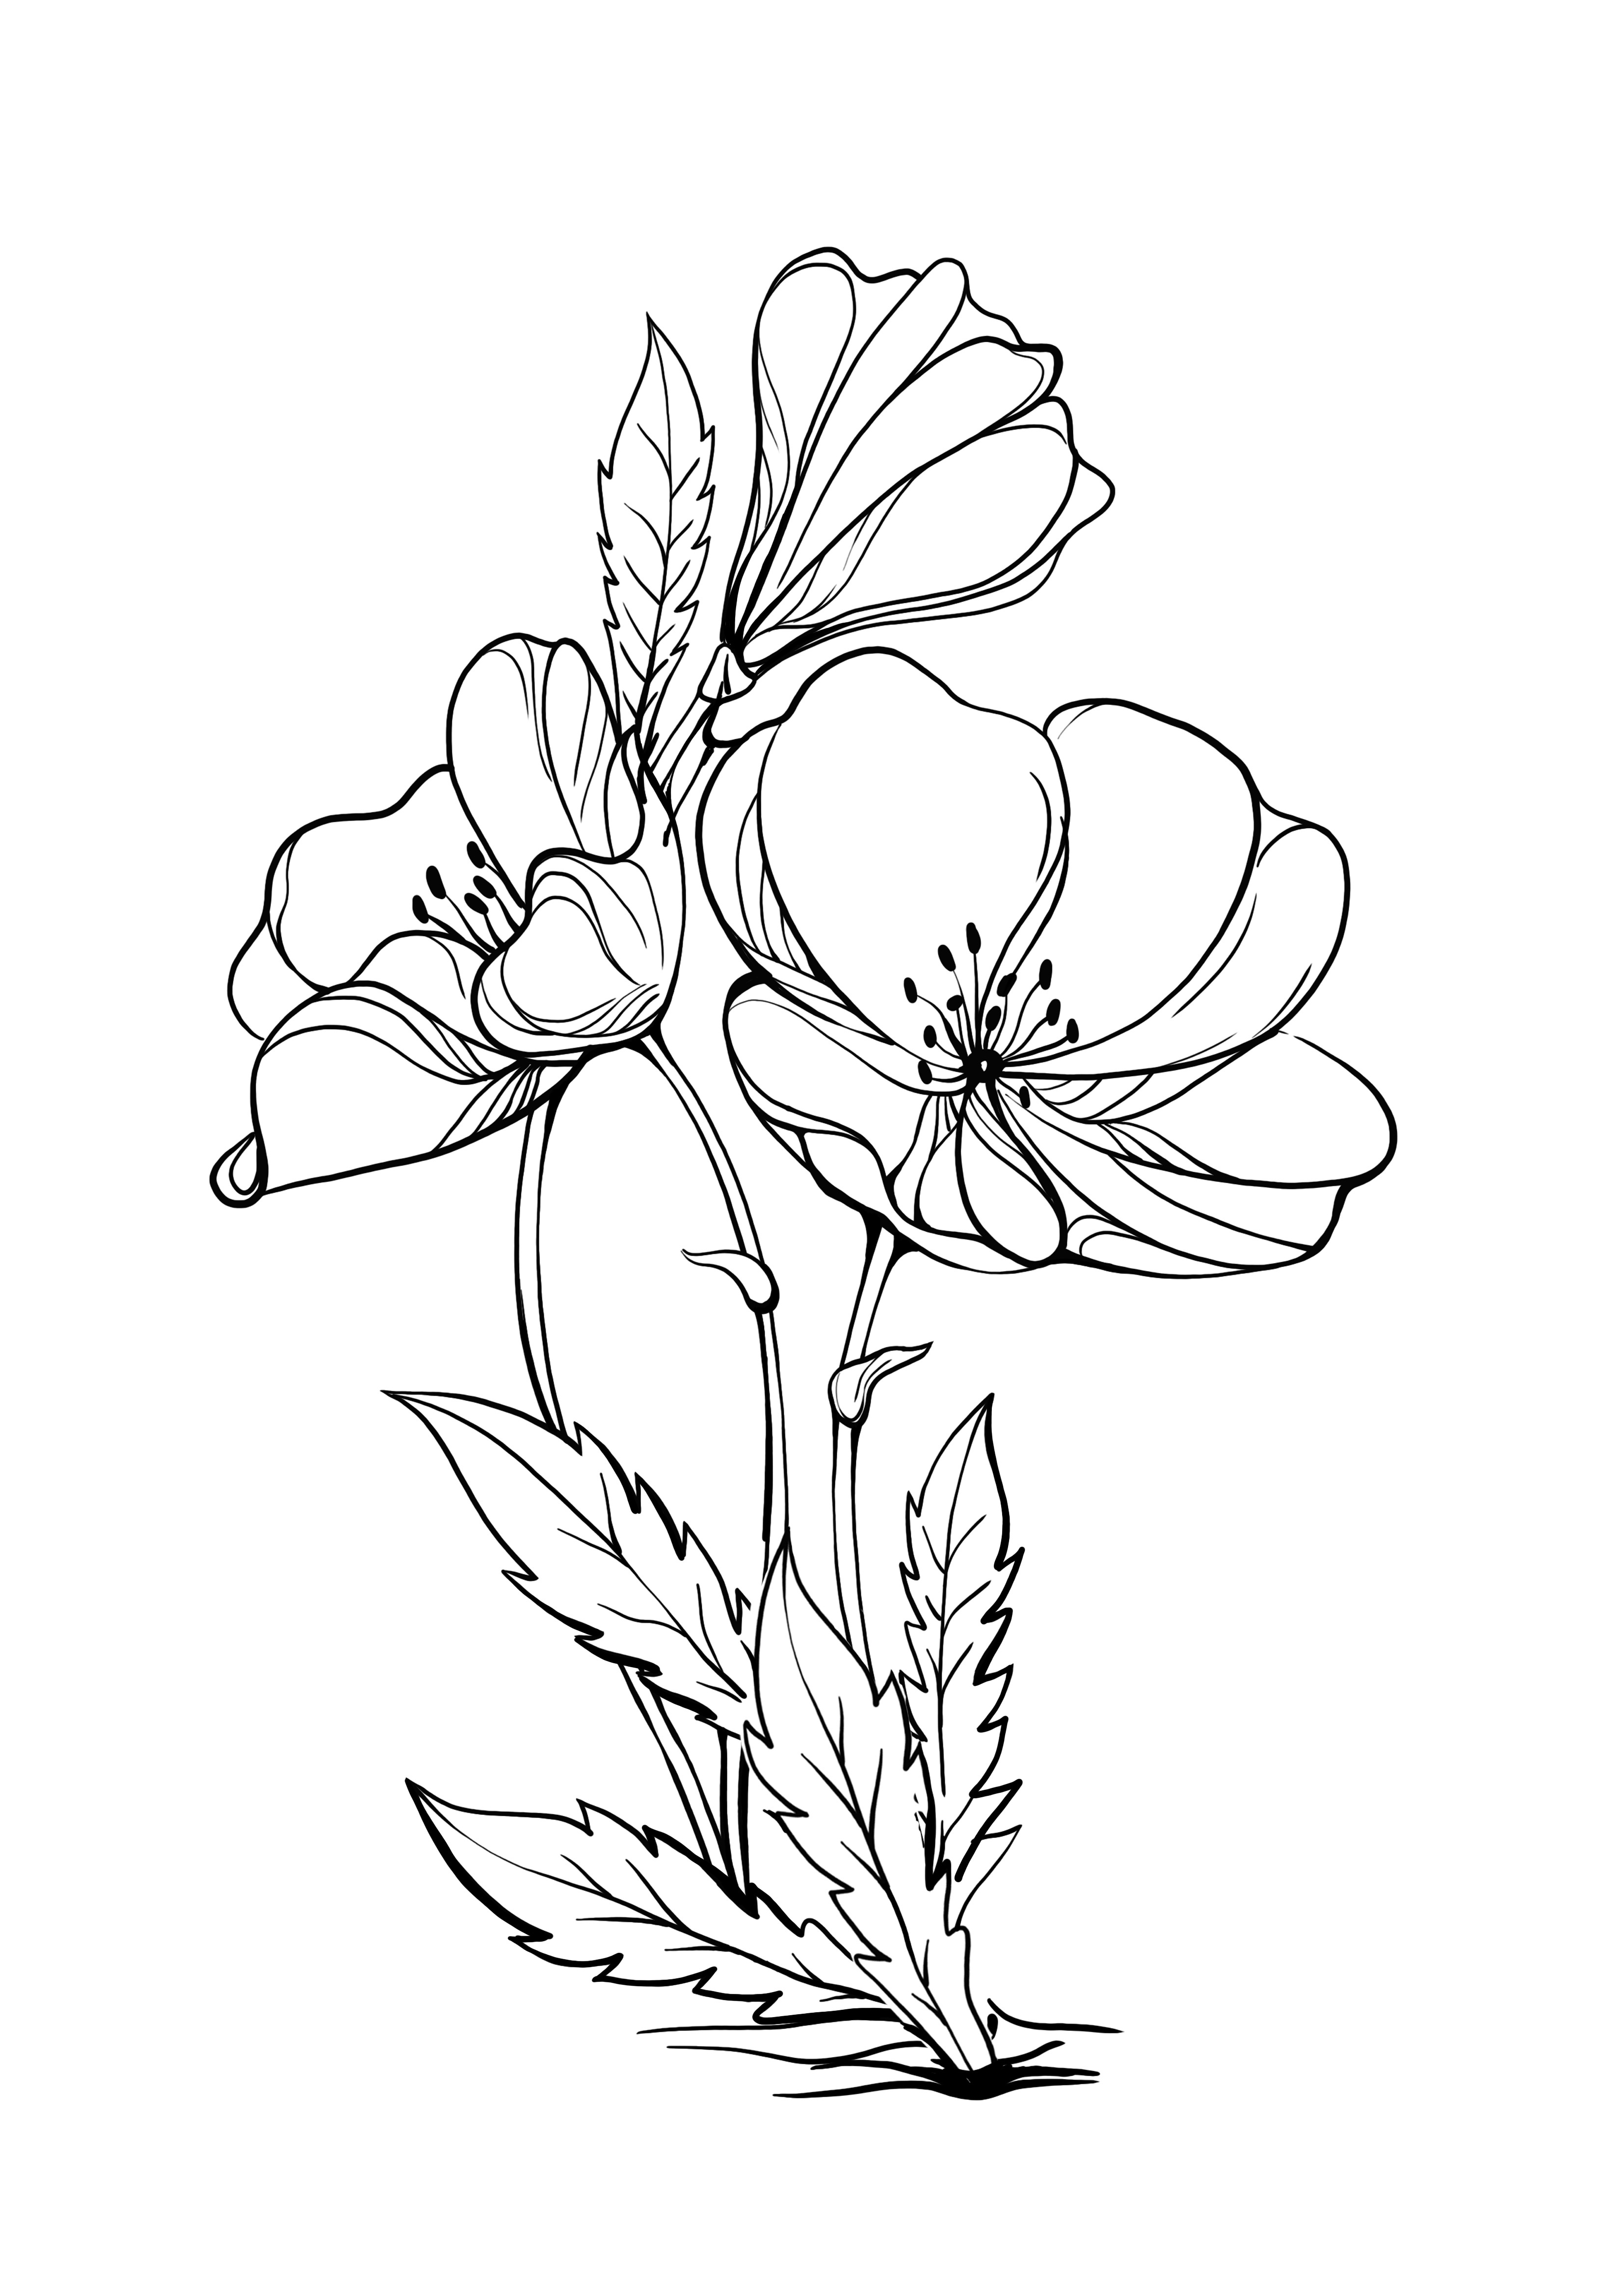 evening primrose printable and coloring